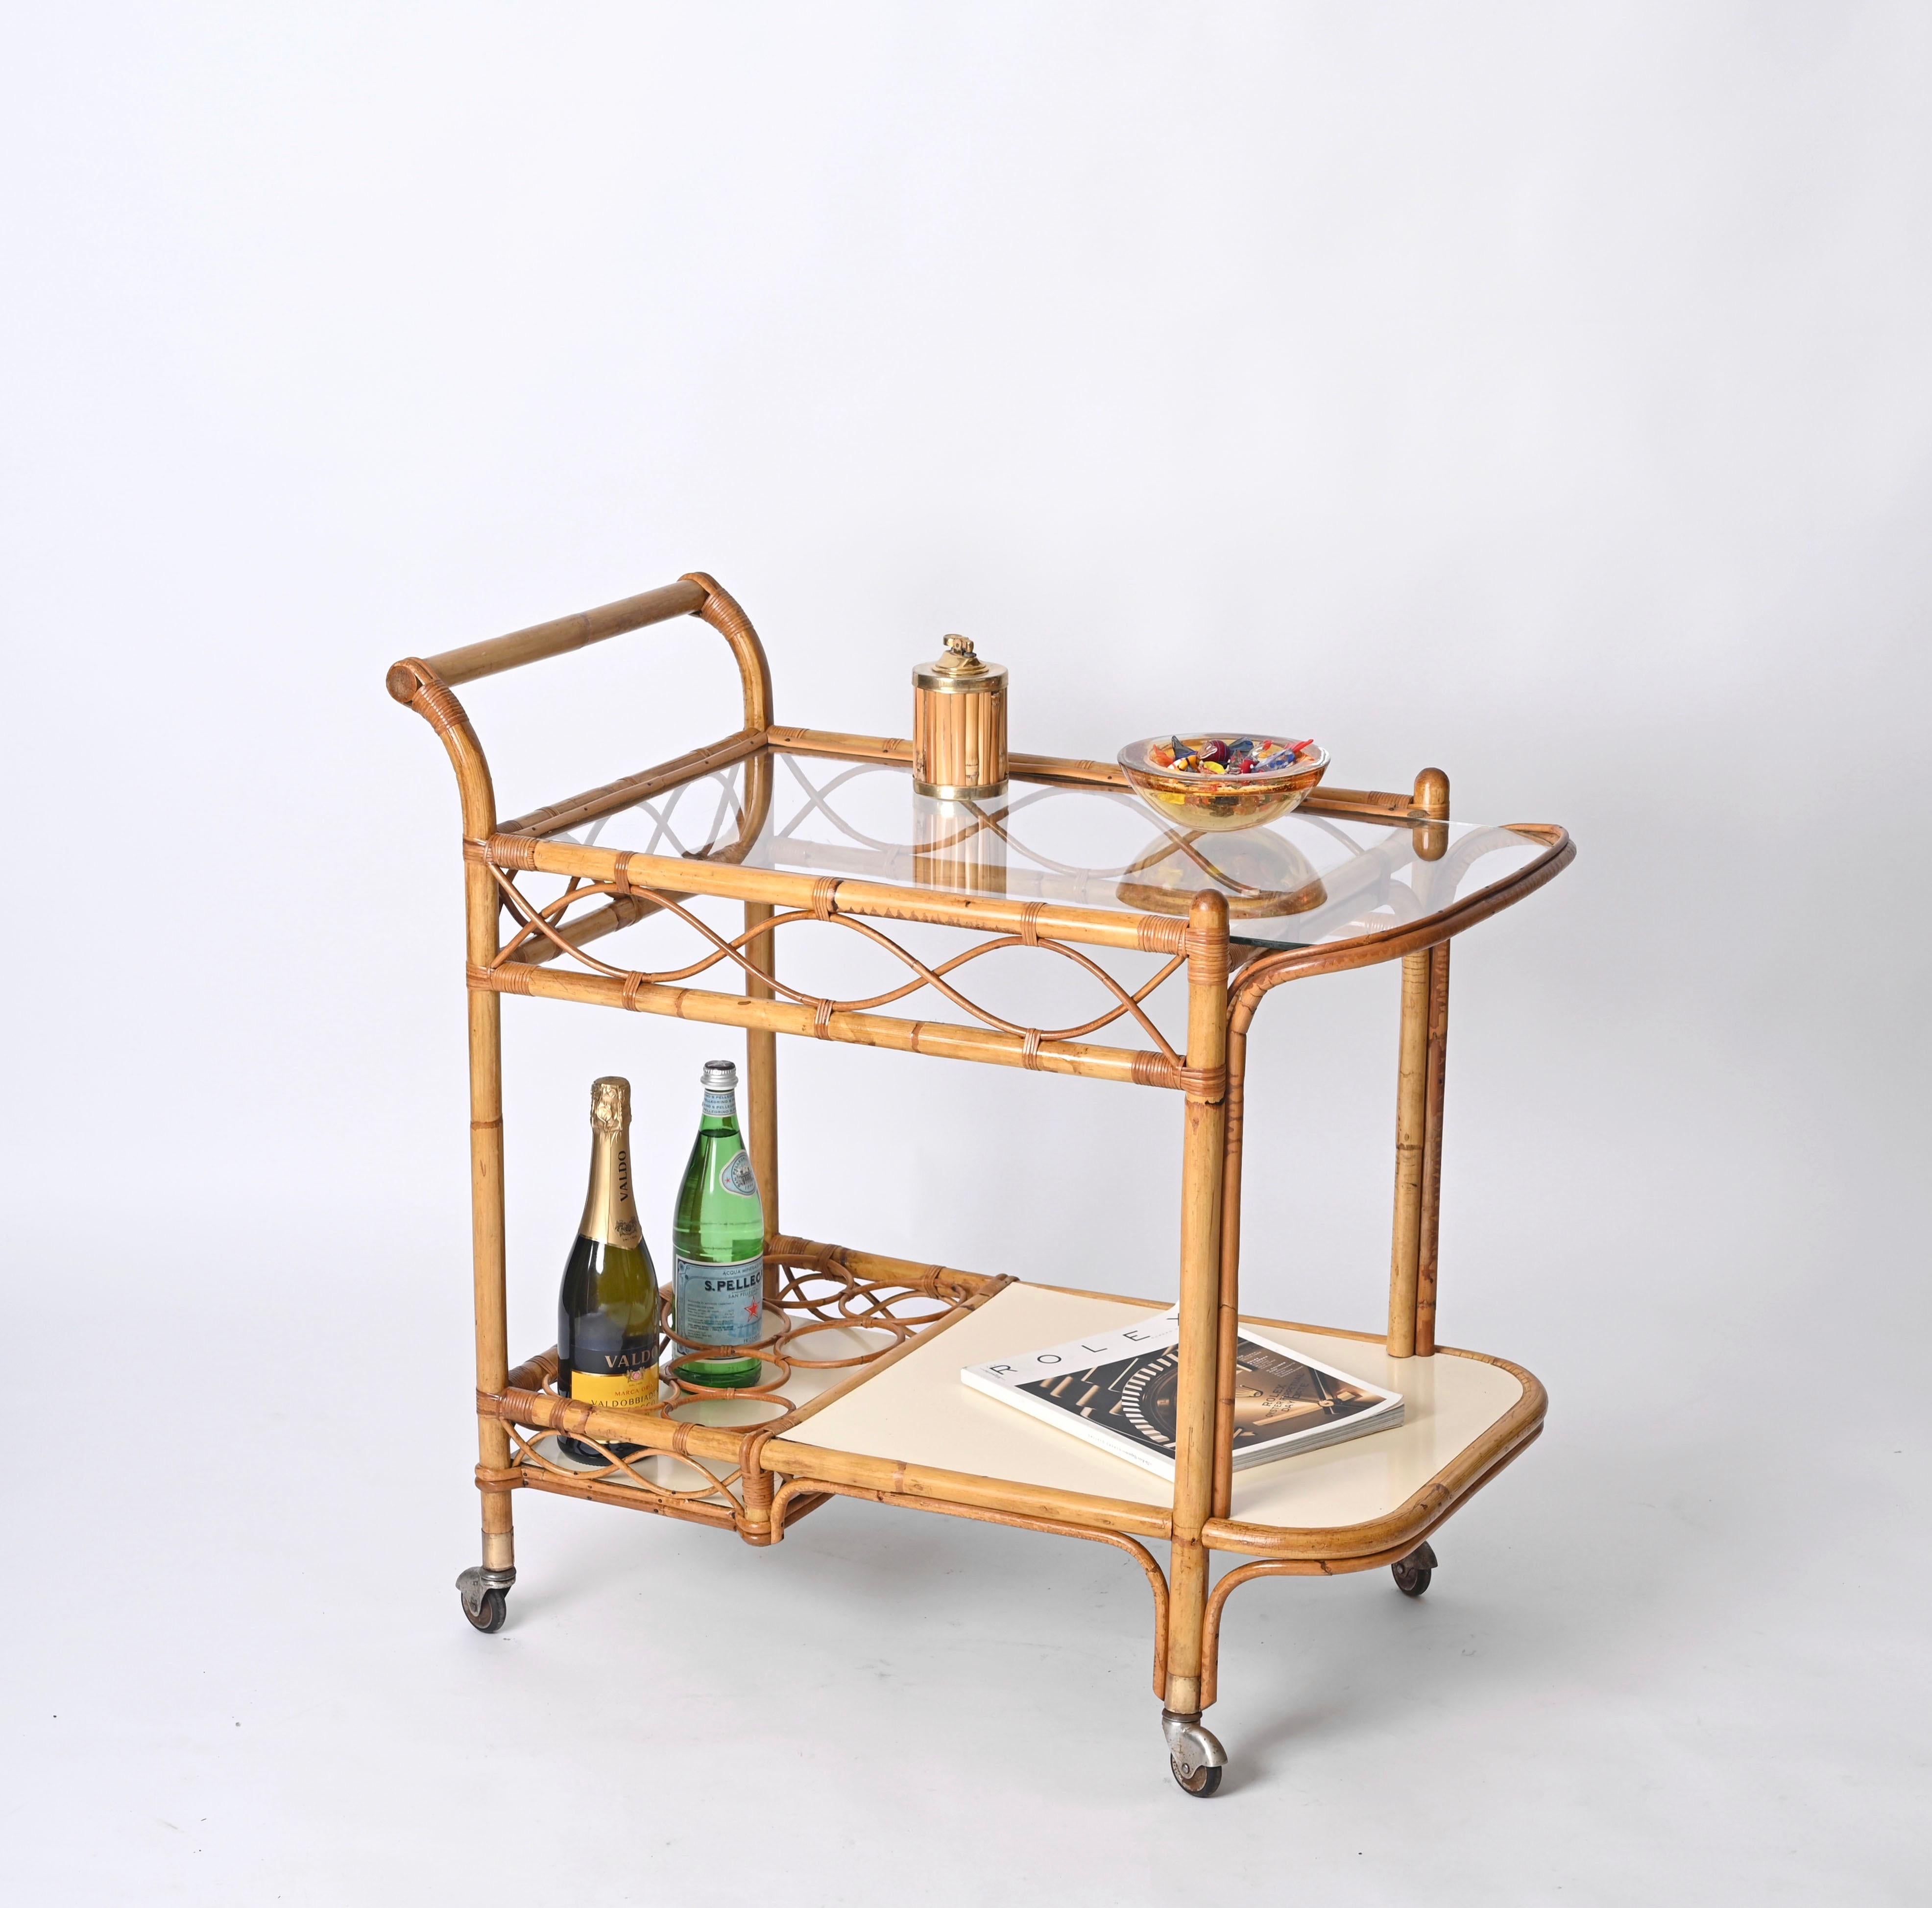 Gorgeous Mid-Century Italian serving trolley in bamboo, curved rattan and woven wicker and white formica. This exceptional piece was produced in Italy during the 1960s.

This unique bar cart has a structure made in bamboo enriched by stunning